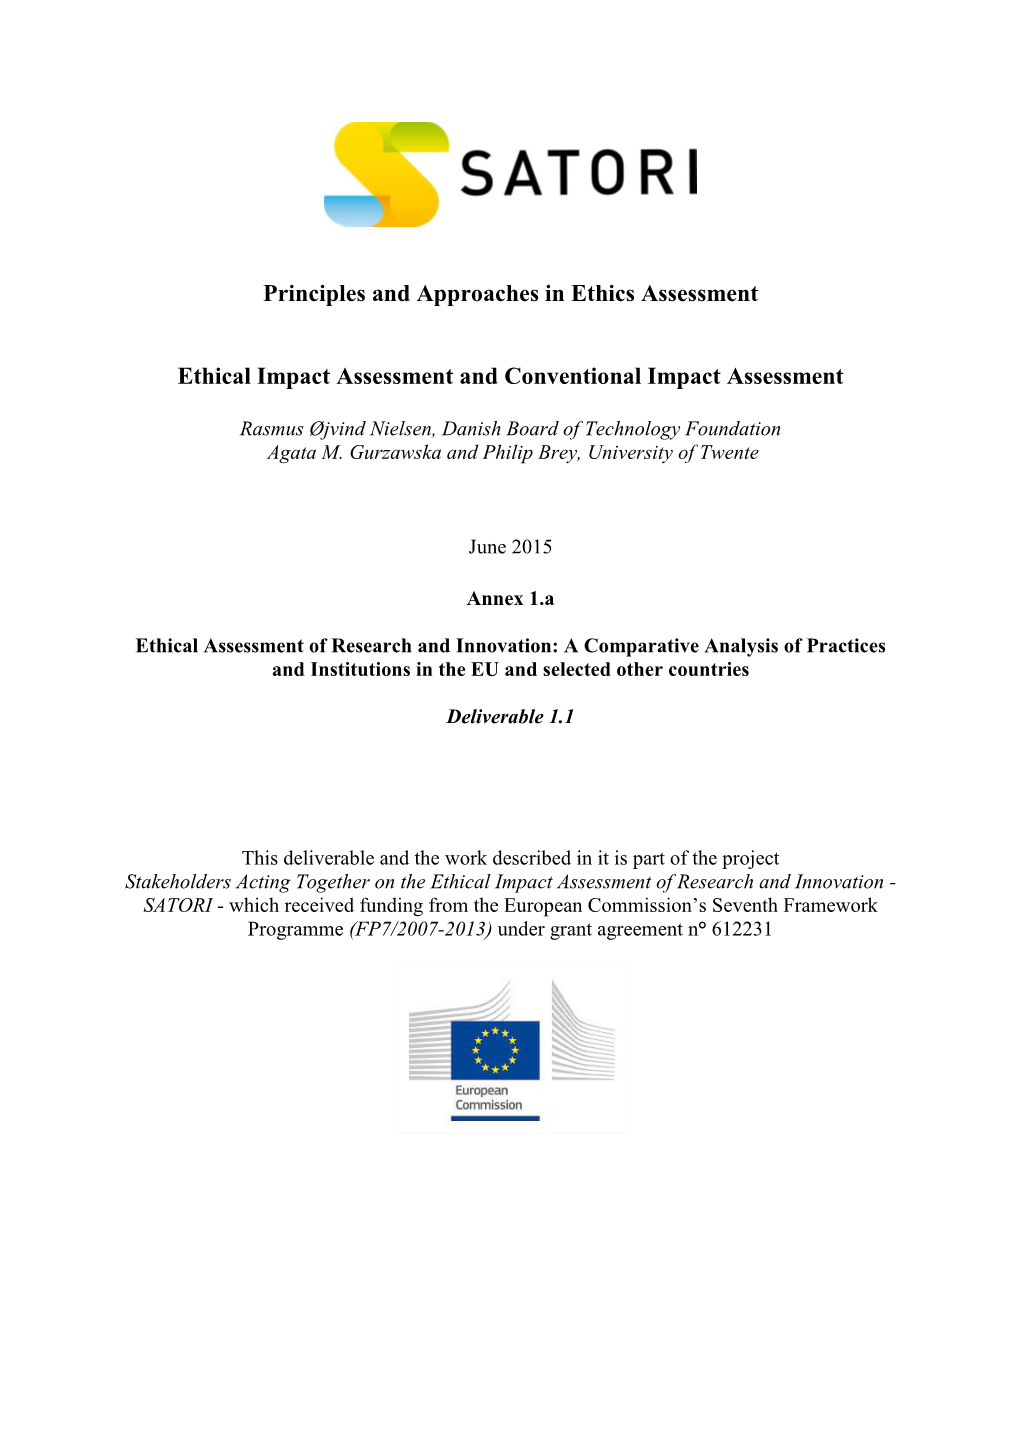 1.A Ethical Impact Assessment and Conventional Impact Assessment